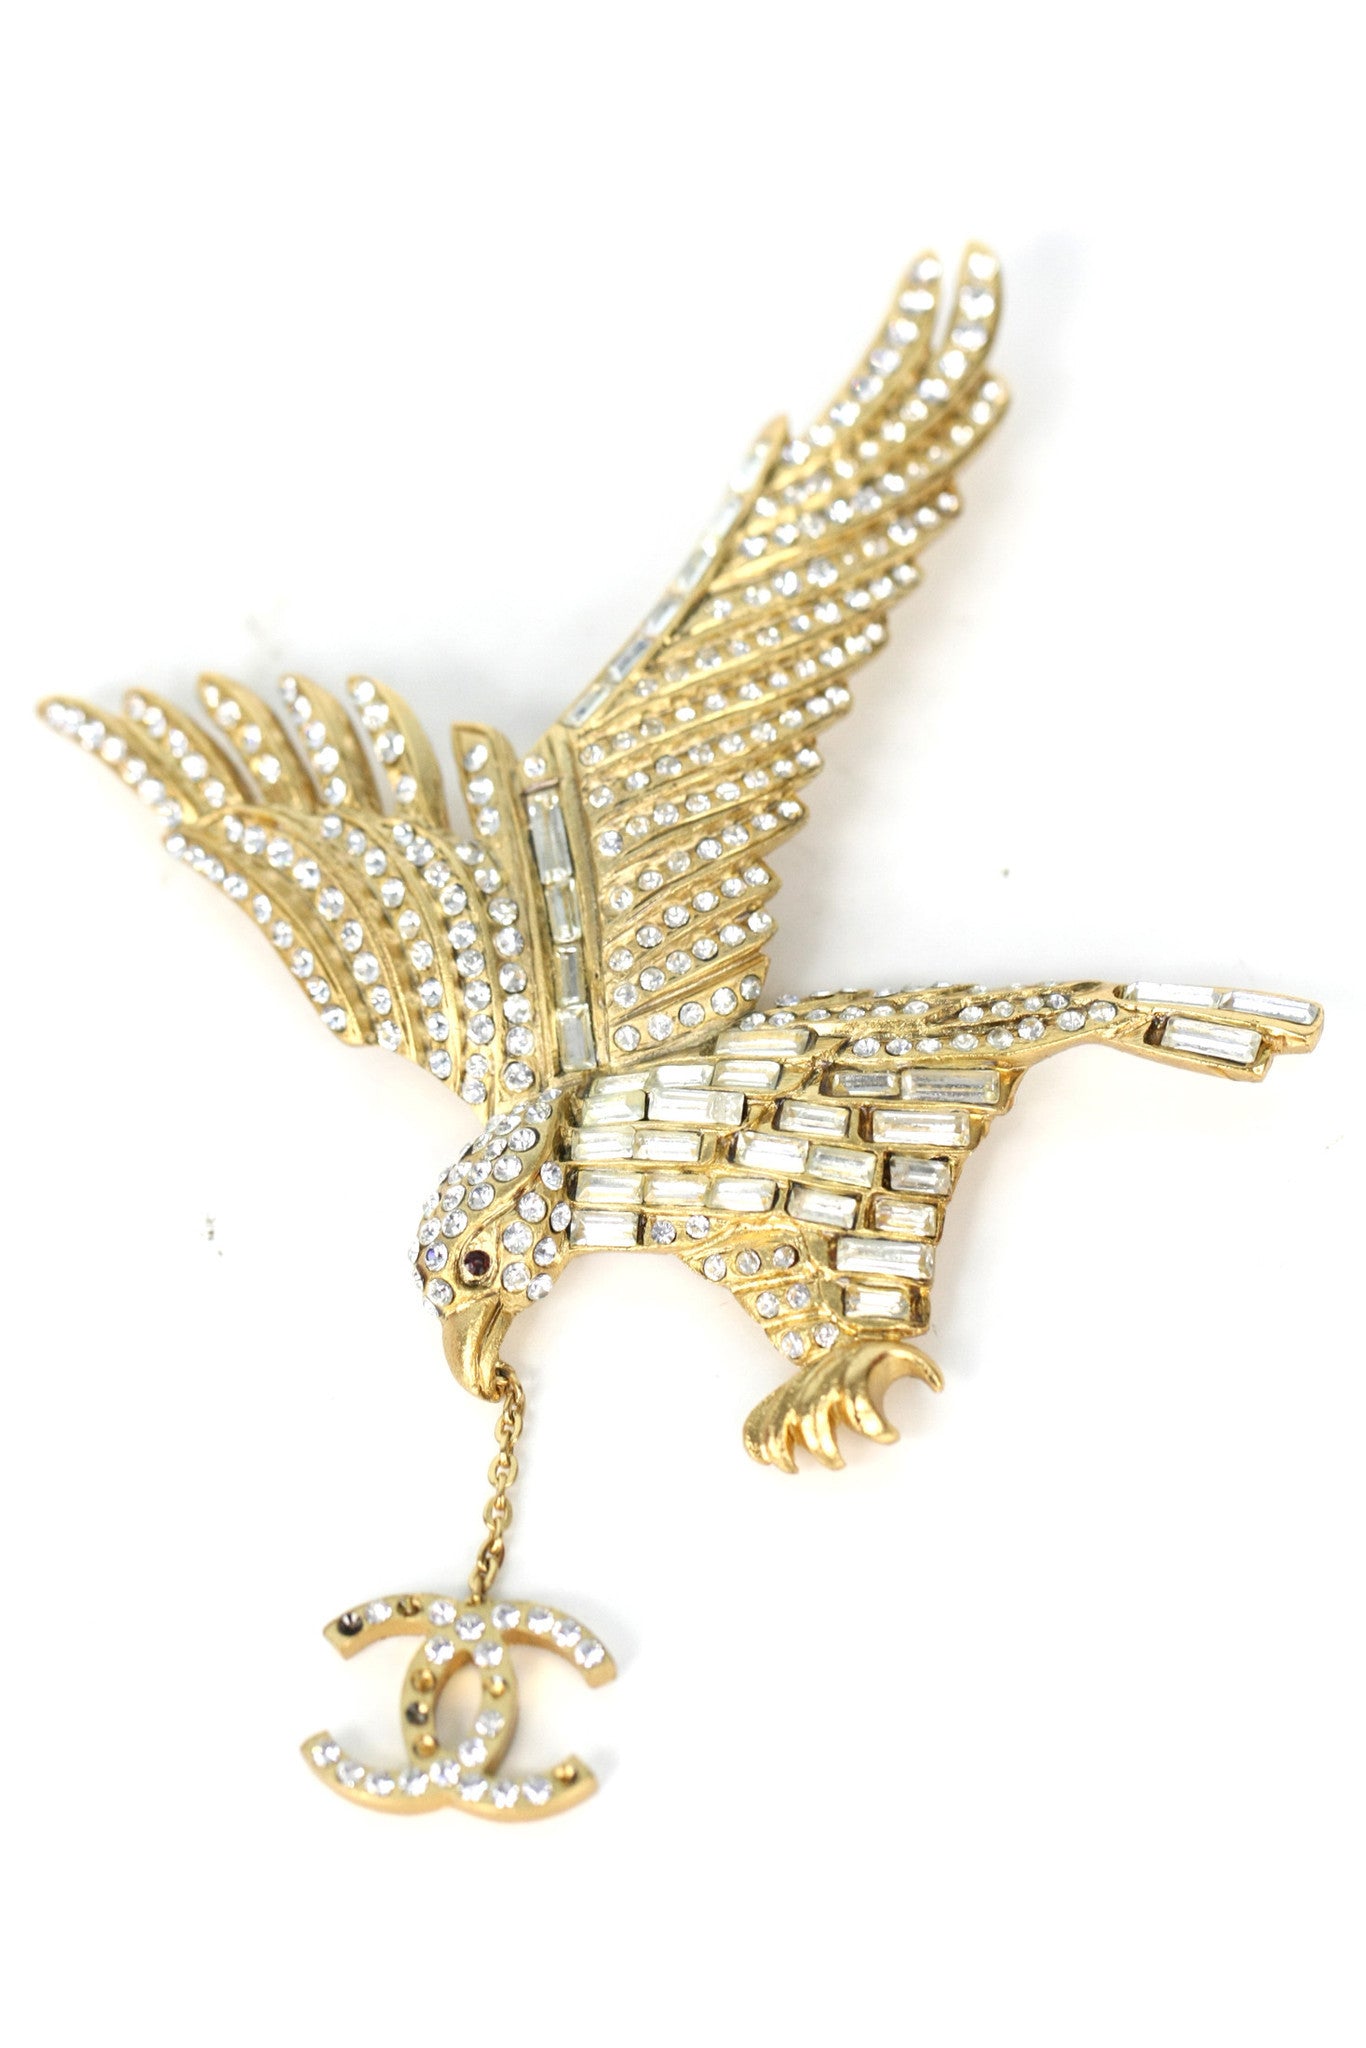 Chanel Rhinestone Eagle Pin  Simply Chic Consignment in SF